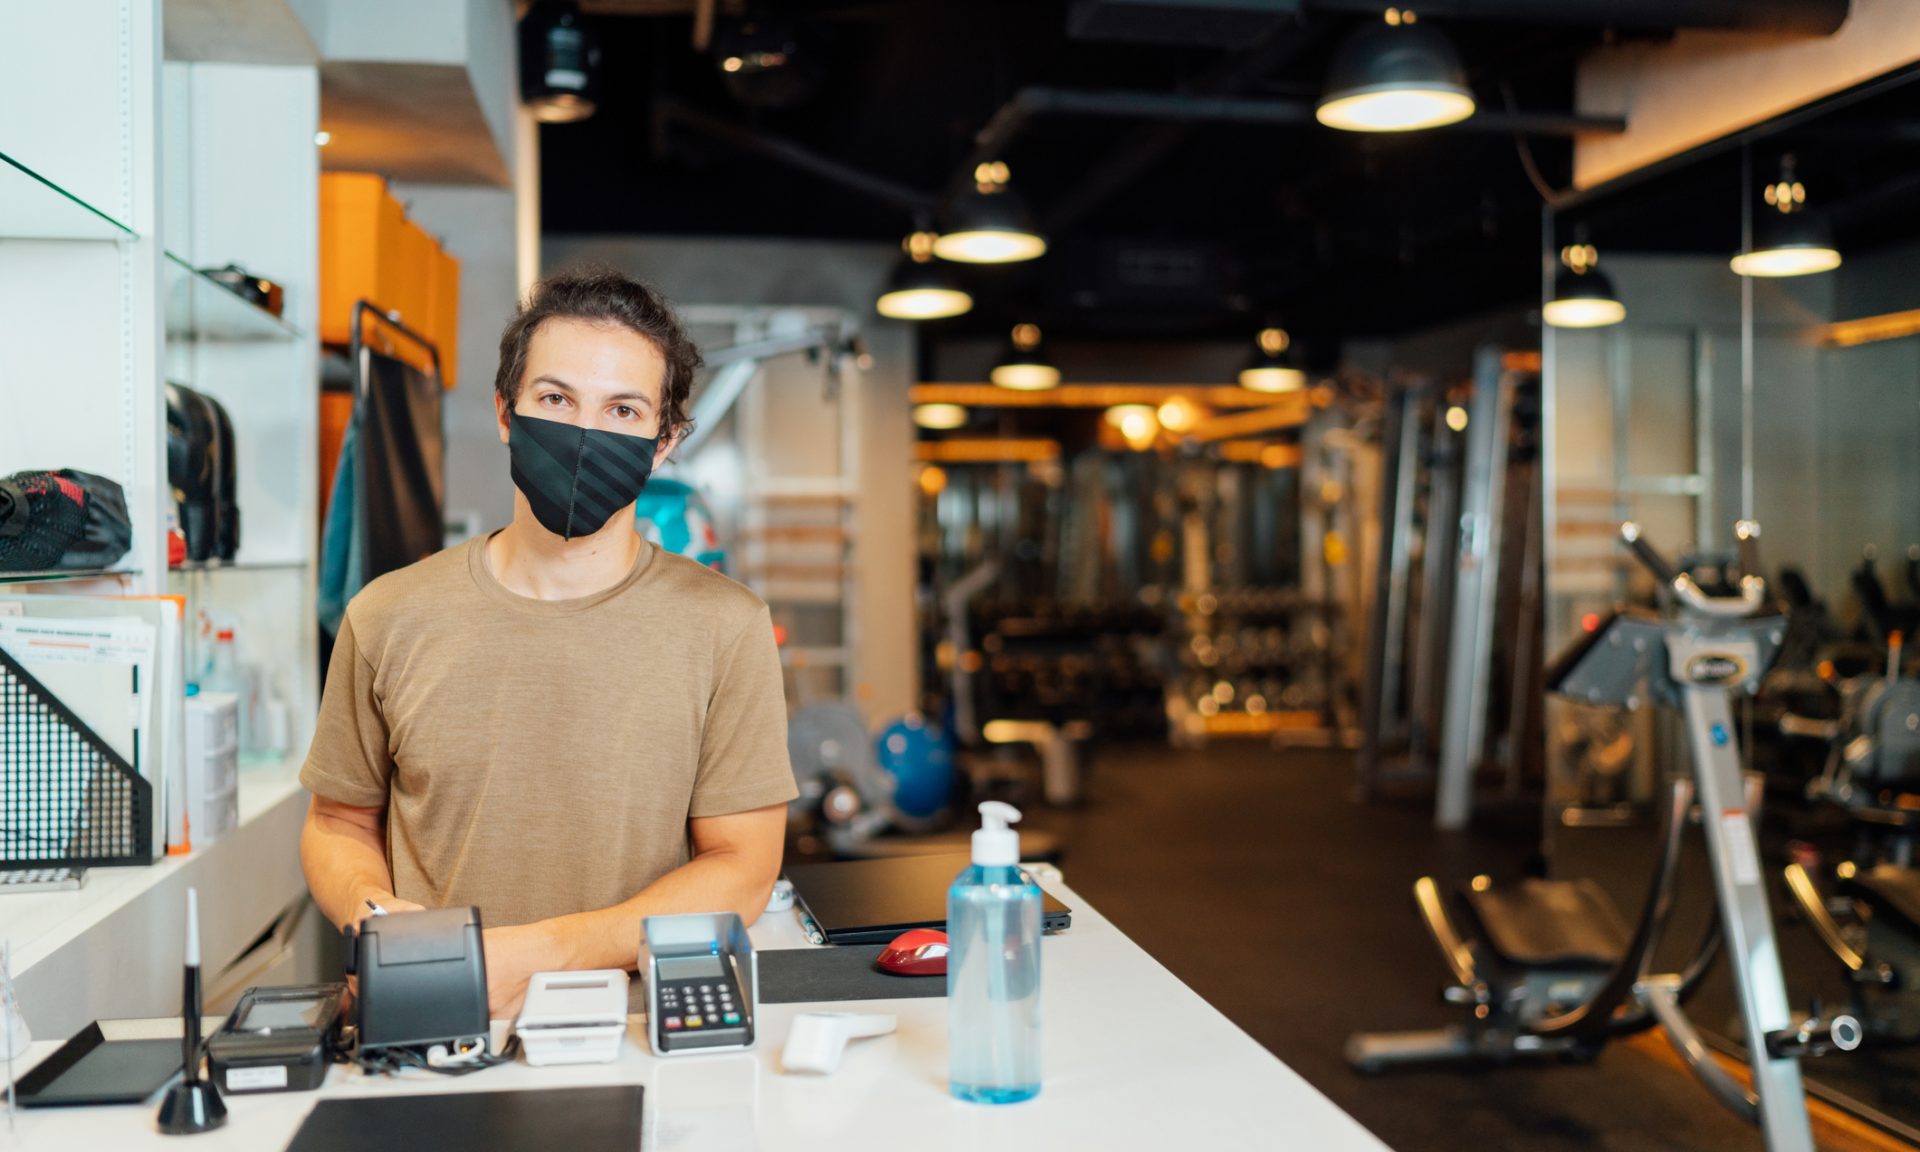 Gym rats score their own dating app